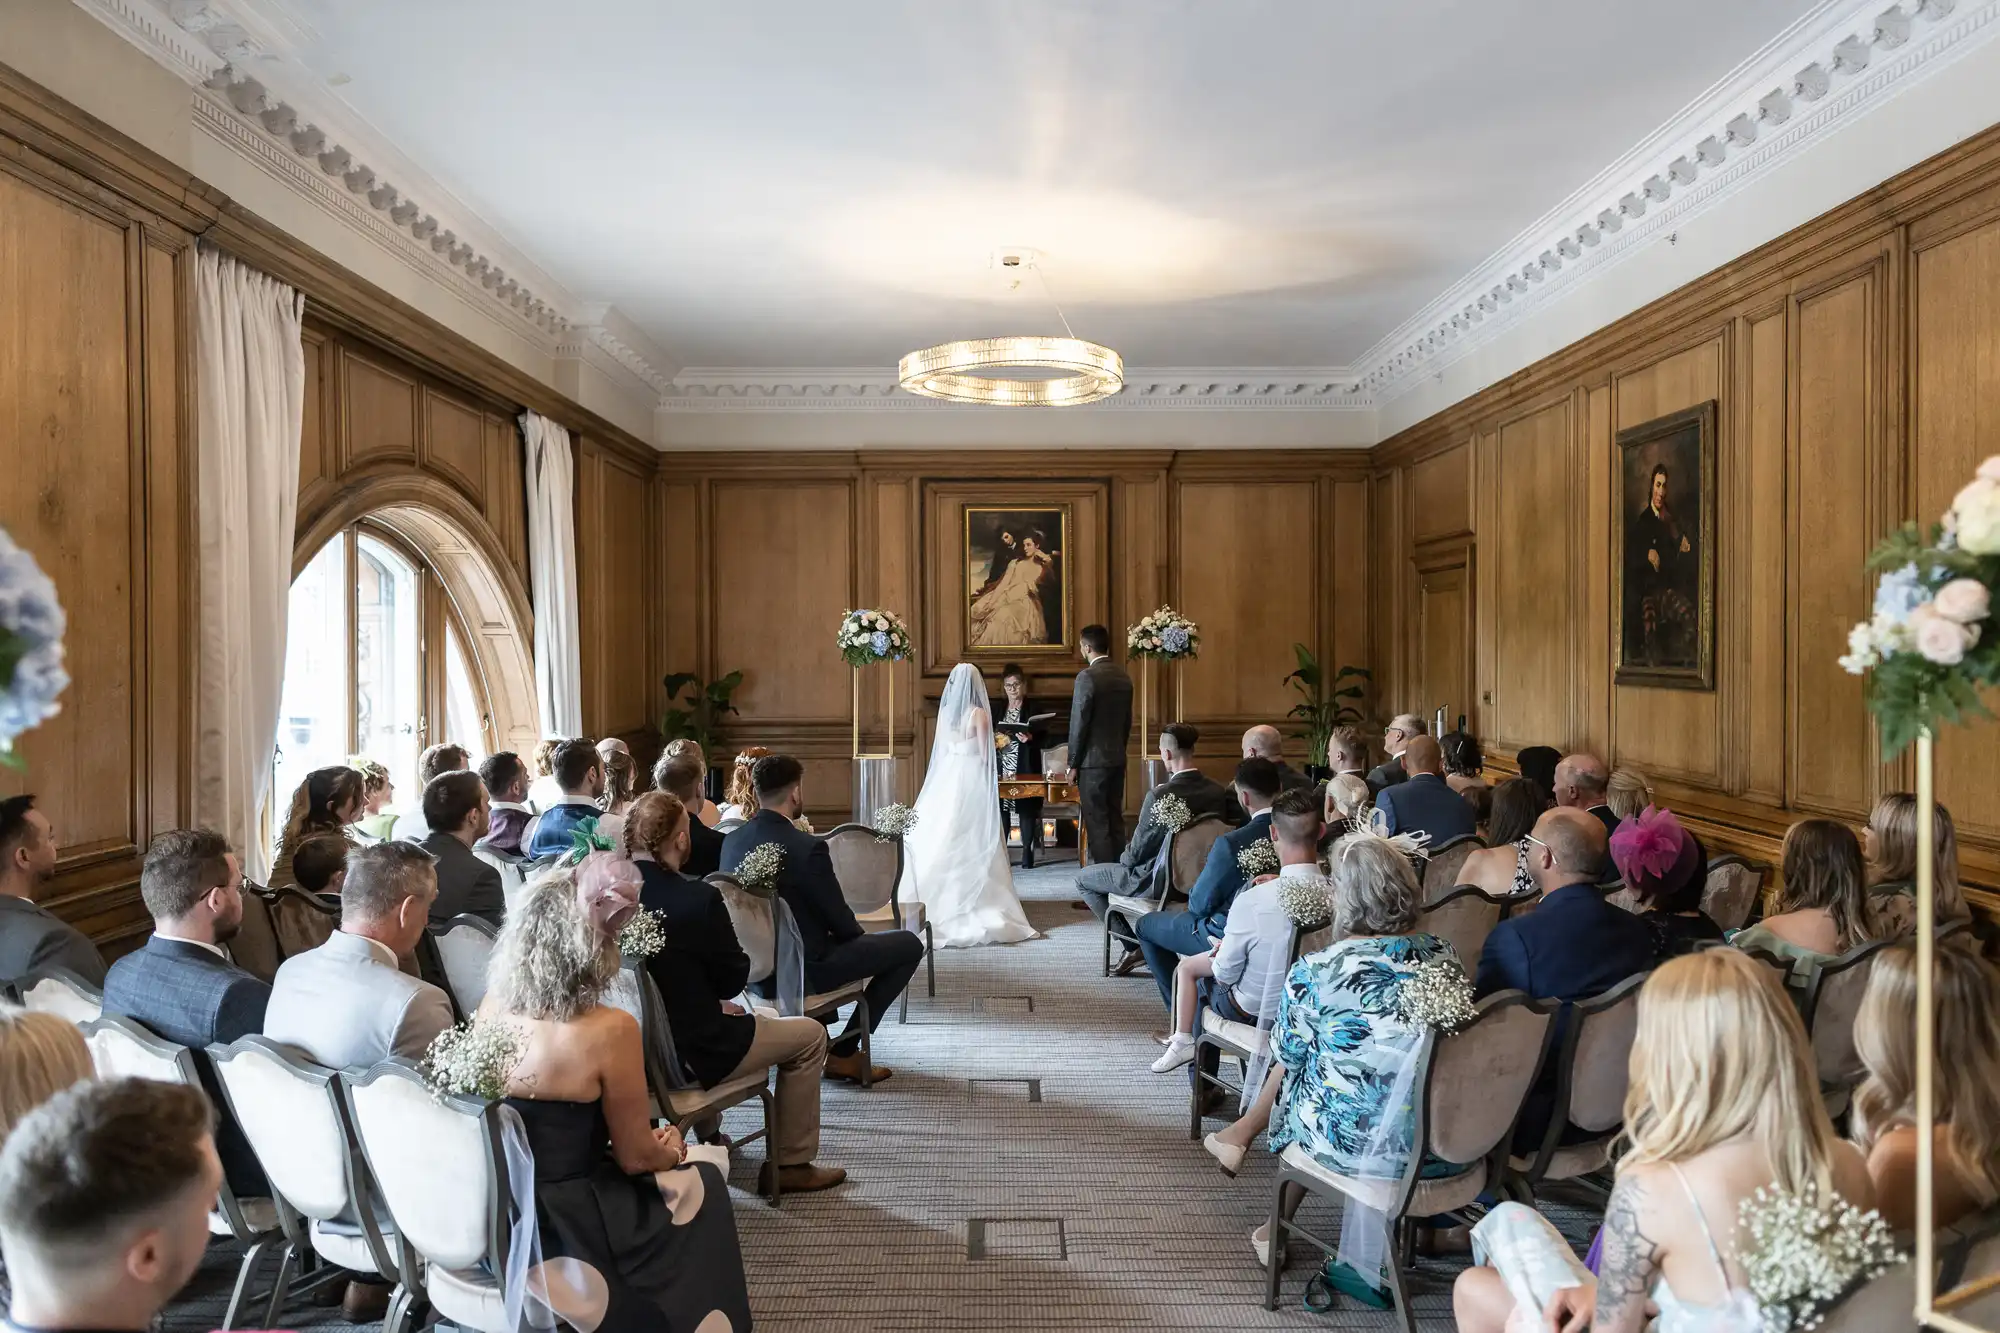 A wedding ceremony in an elegant room with guests seated as a couple stands in front of the officiant.